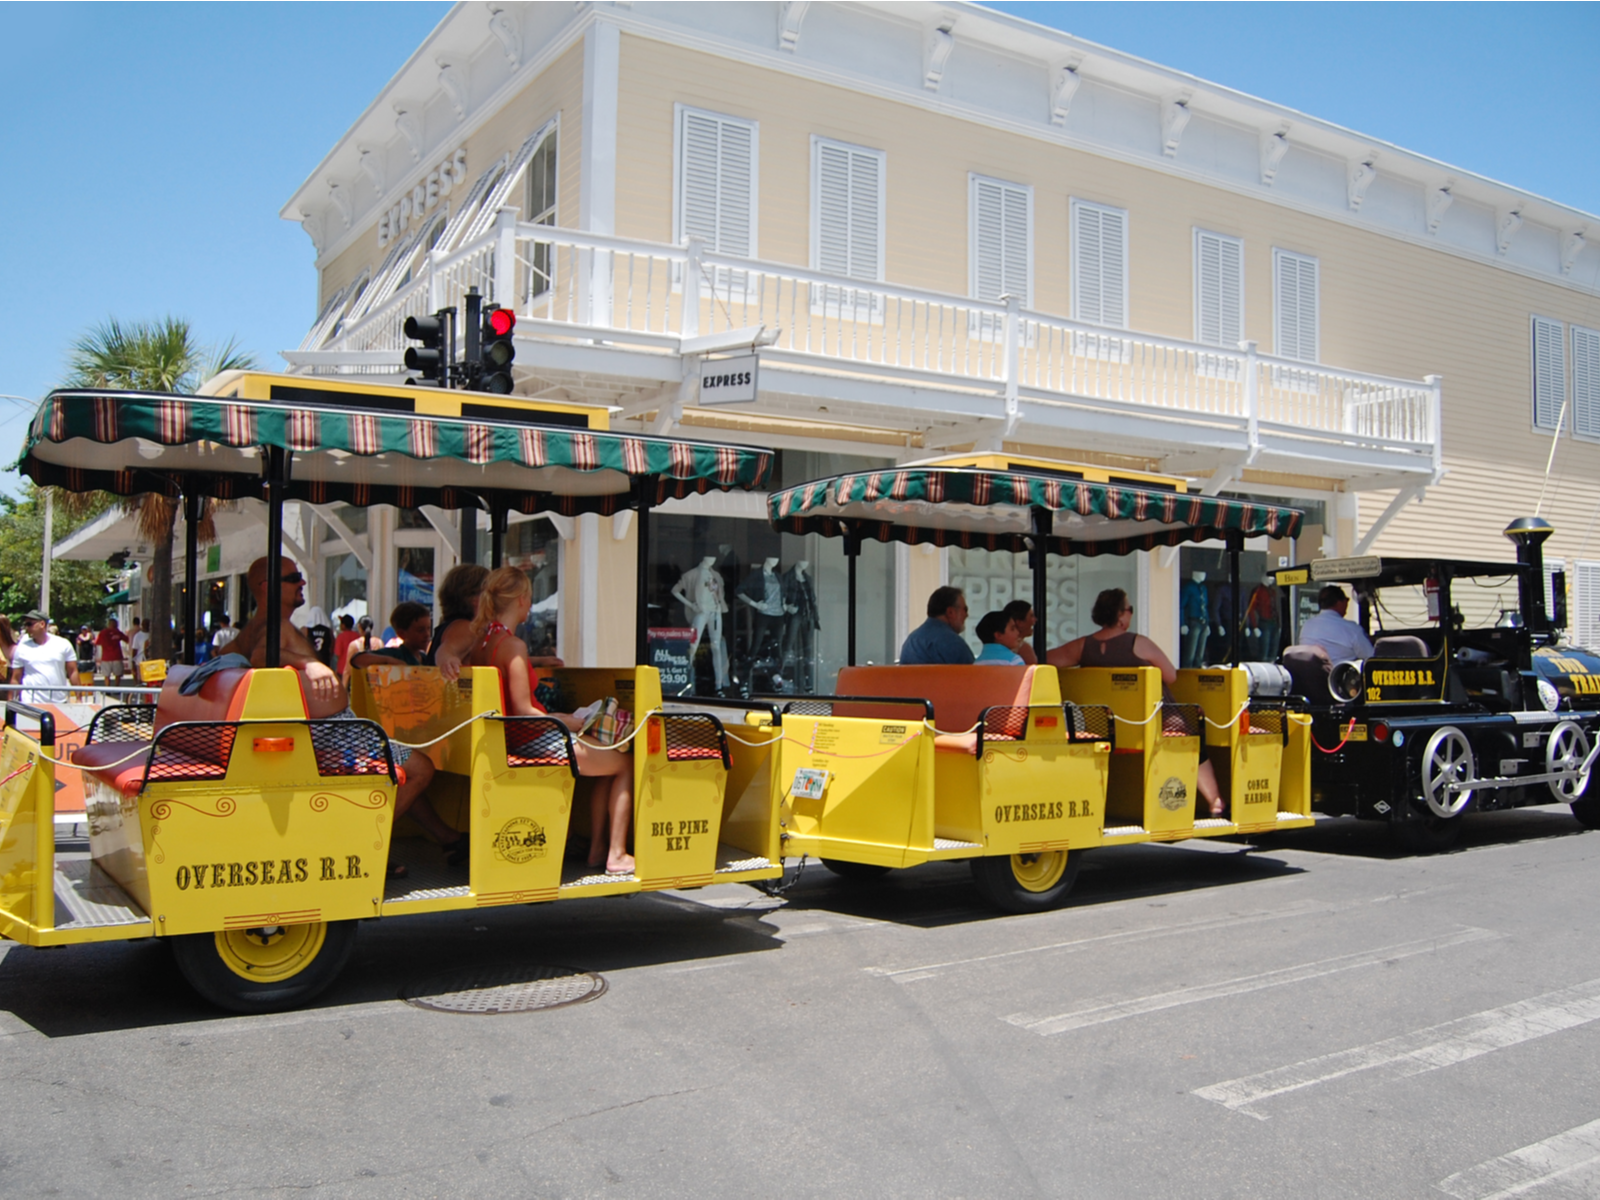 Several tourist, touring over one of the best things to do in Key West, riding the Conch Tour Train, and several people walking in backdrop